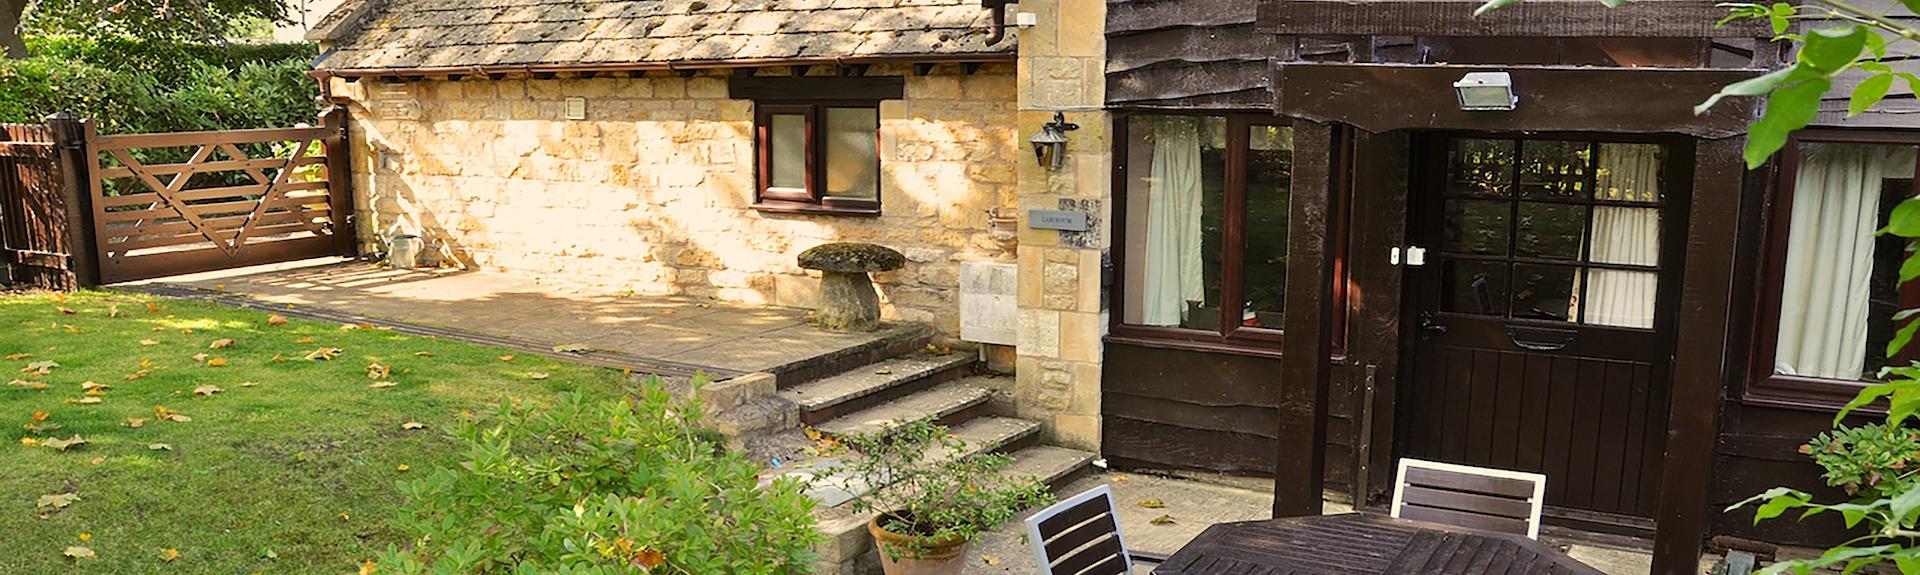 Exterior and garden of a stone-built holiday cottage in The Cotswolds